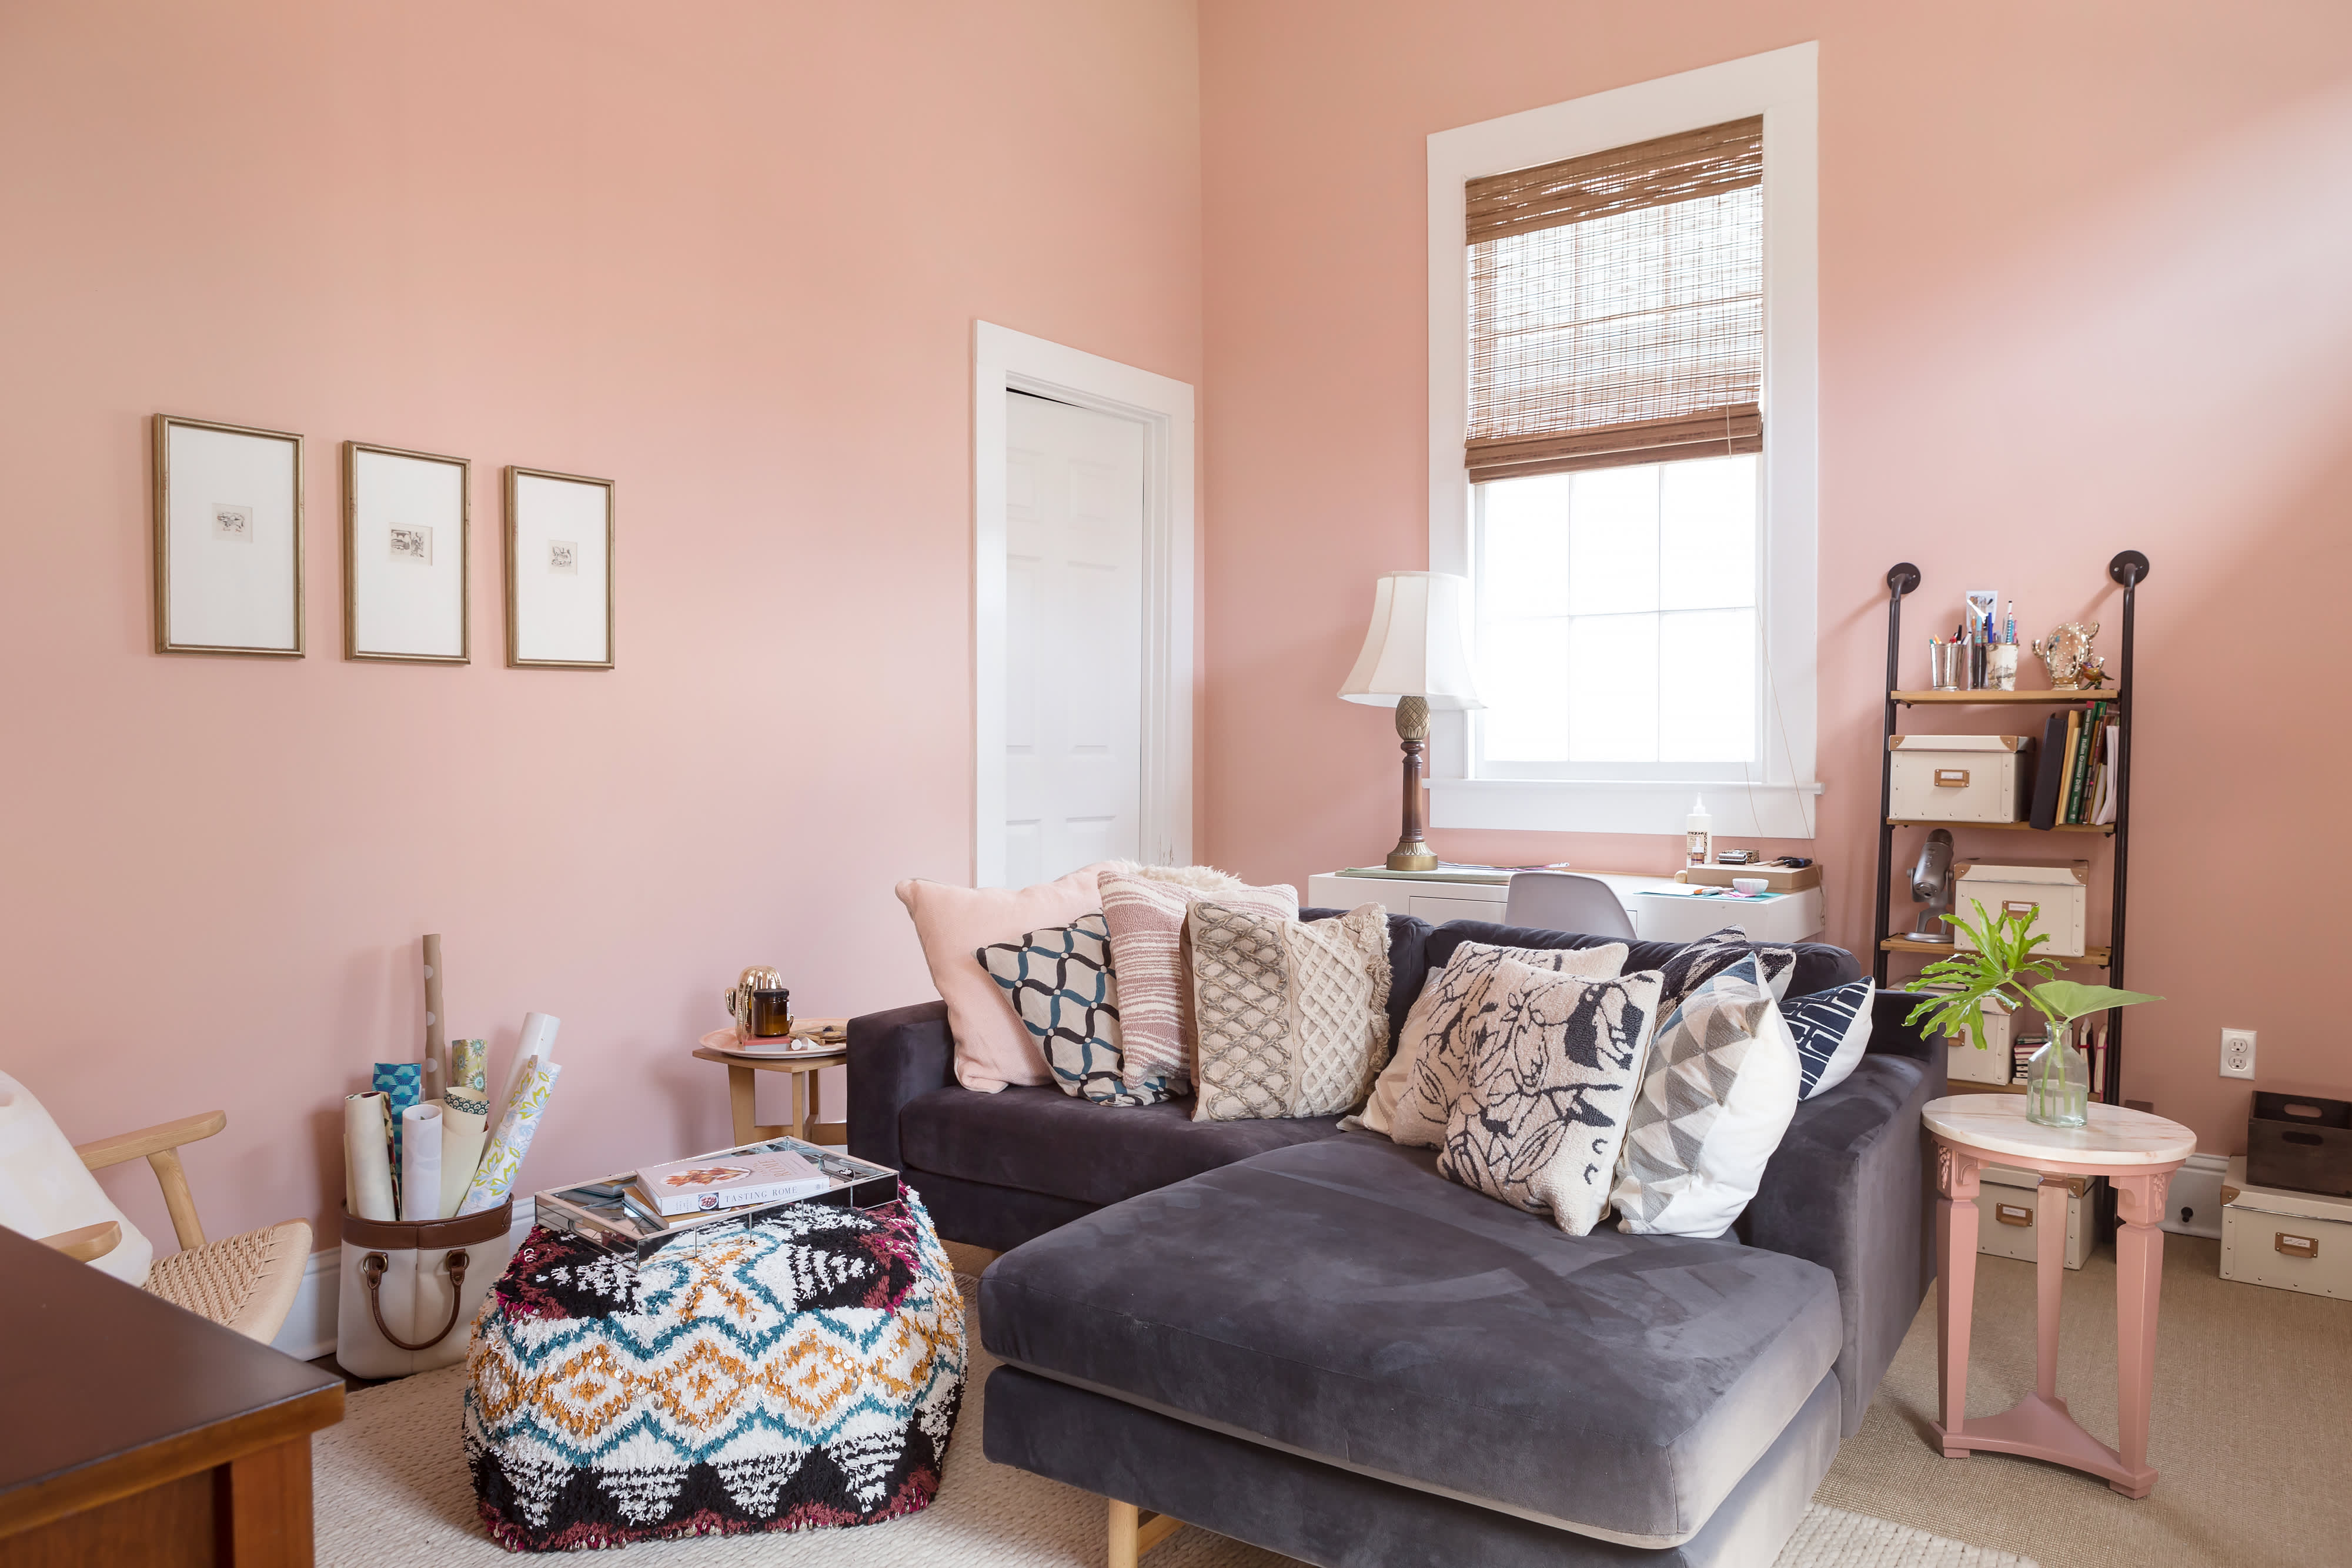 Guide to Choosing the Best Non-Toxic Paint for Interior Walls